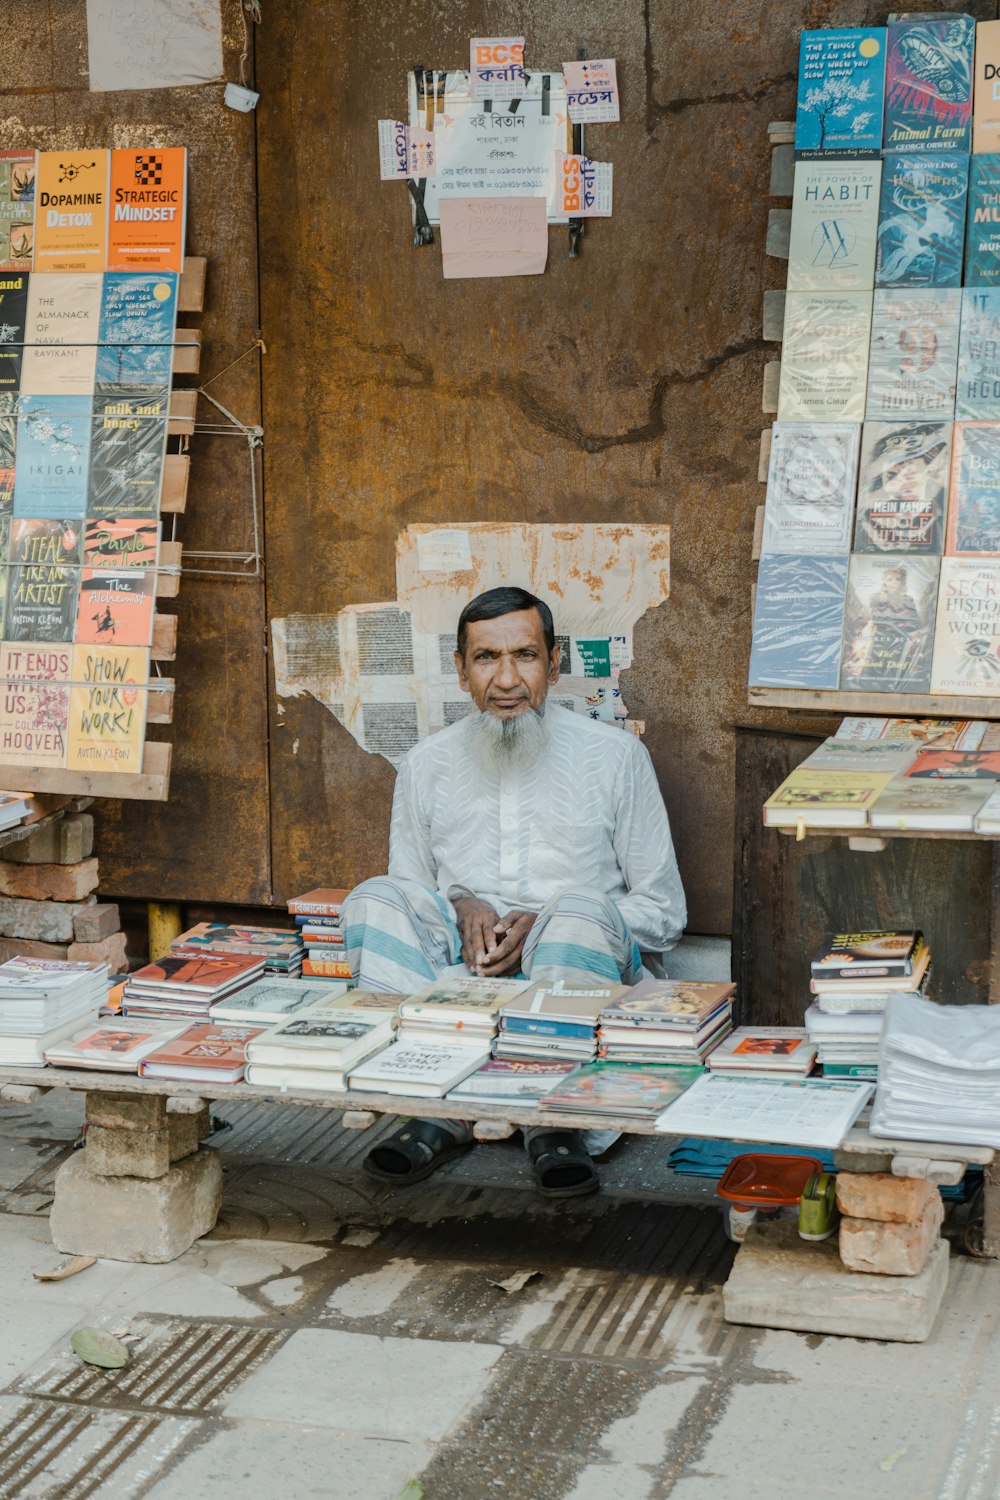 a man sitting on a bench surrounded by books